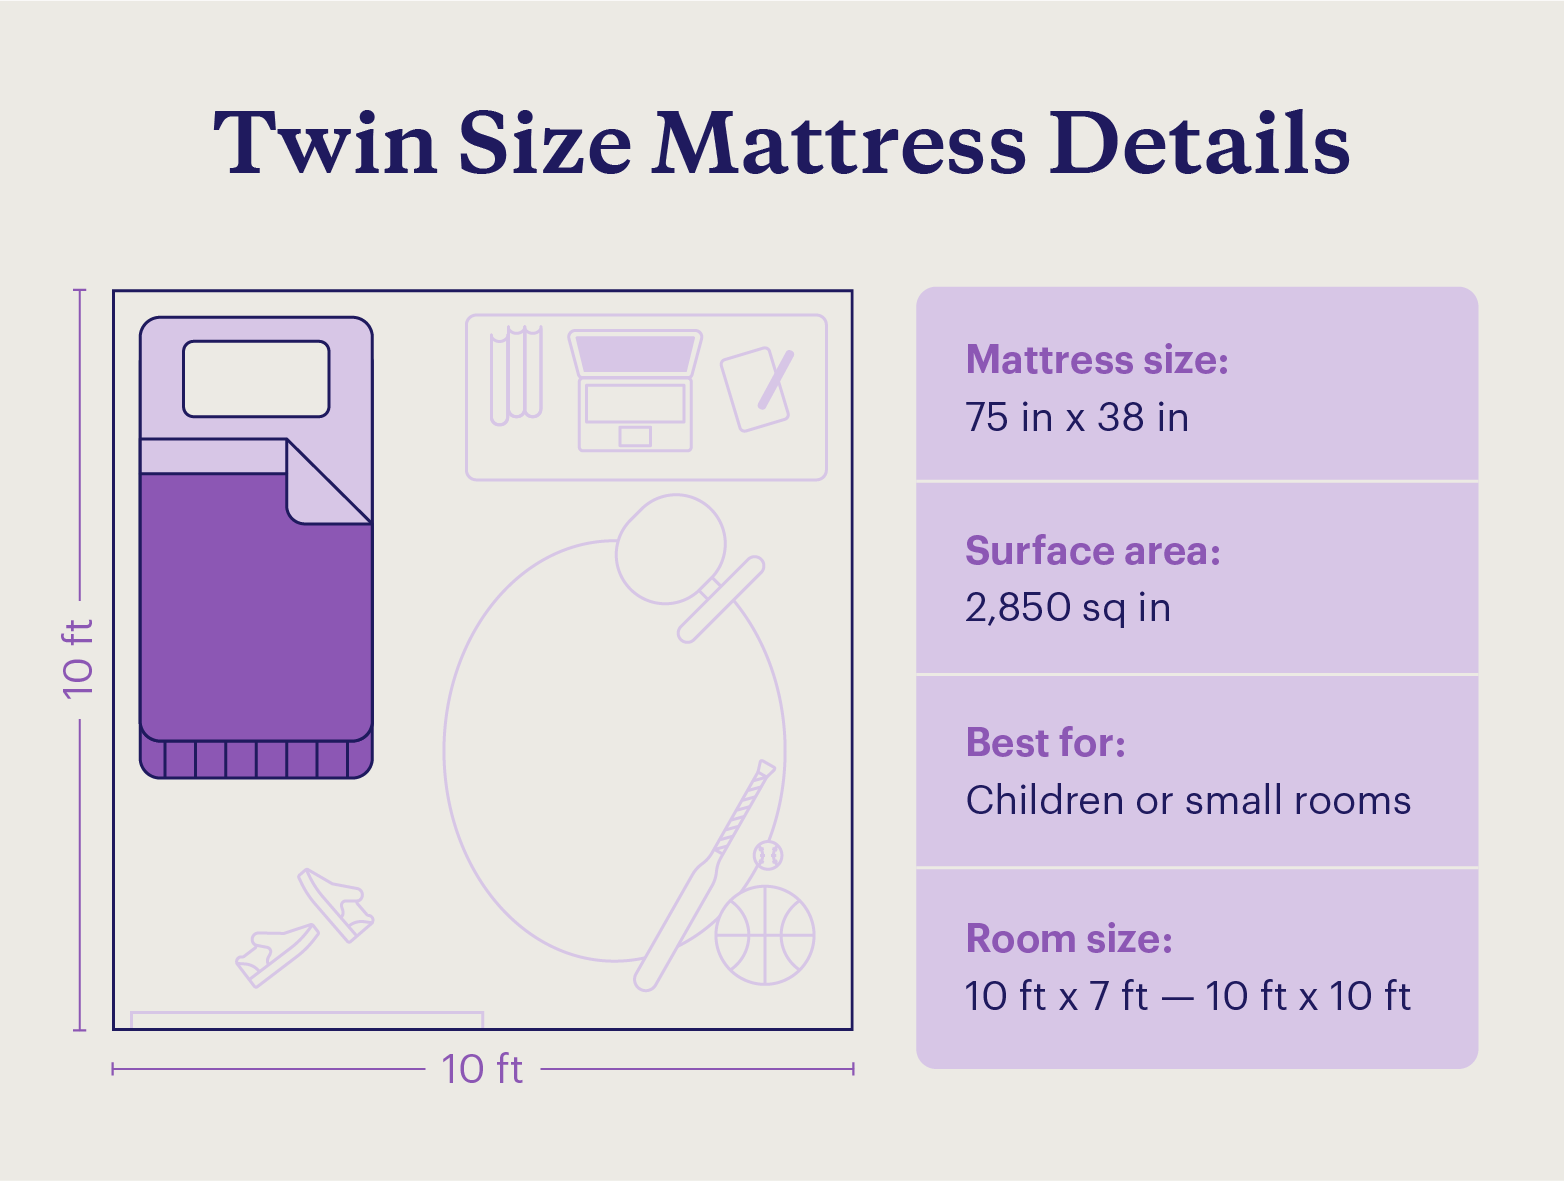 A floor plan showing the ideal room size for a twin mattress.